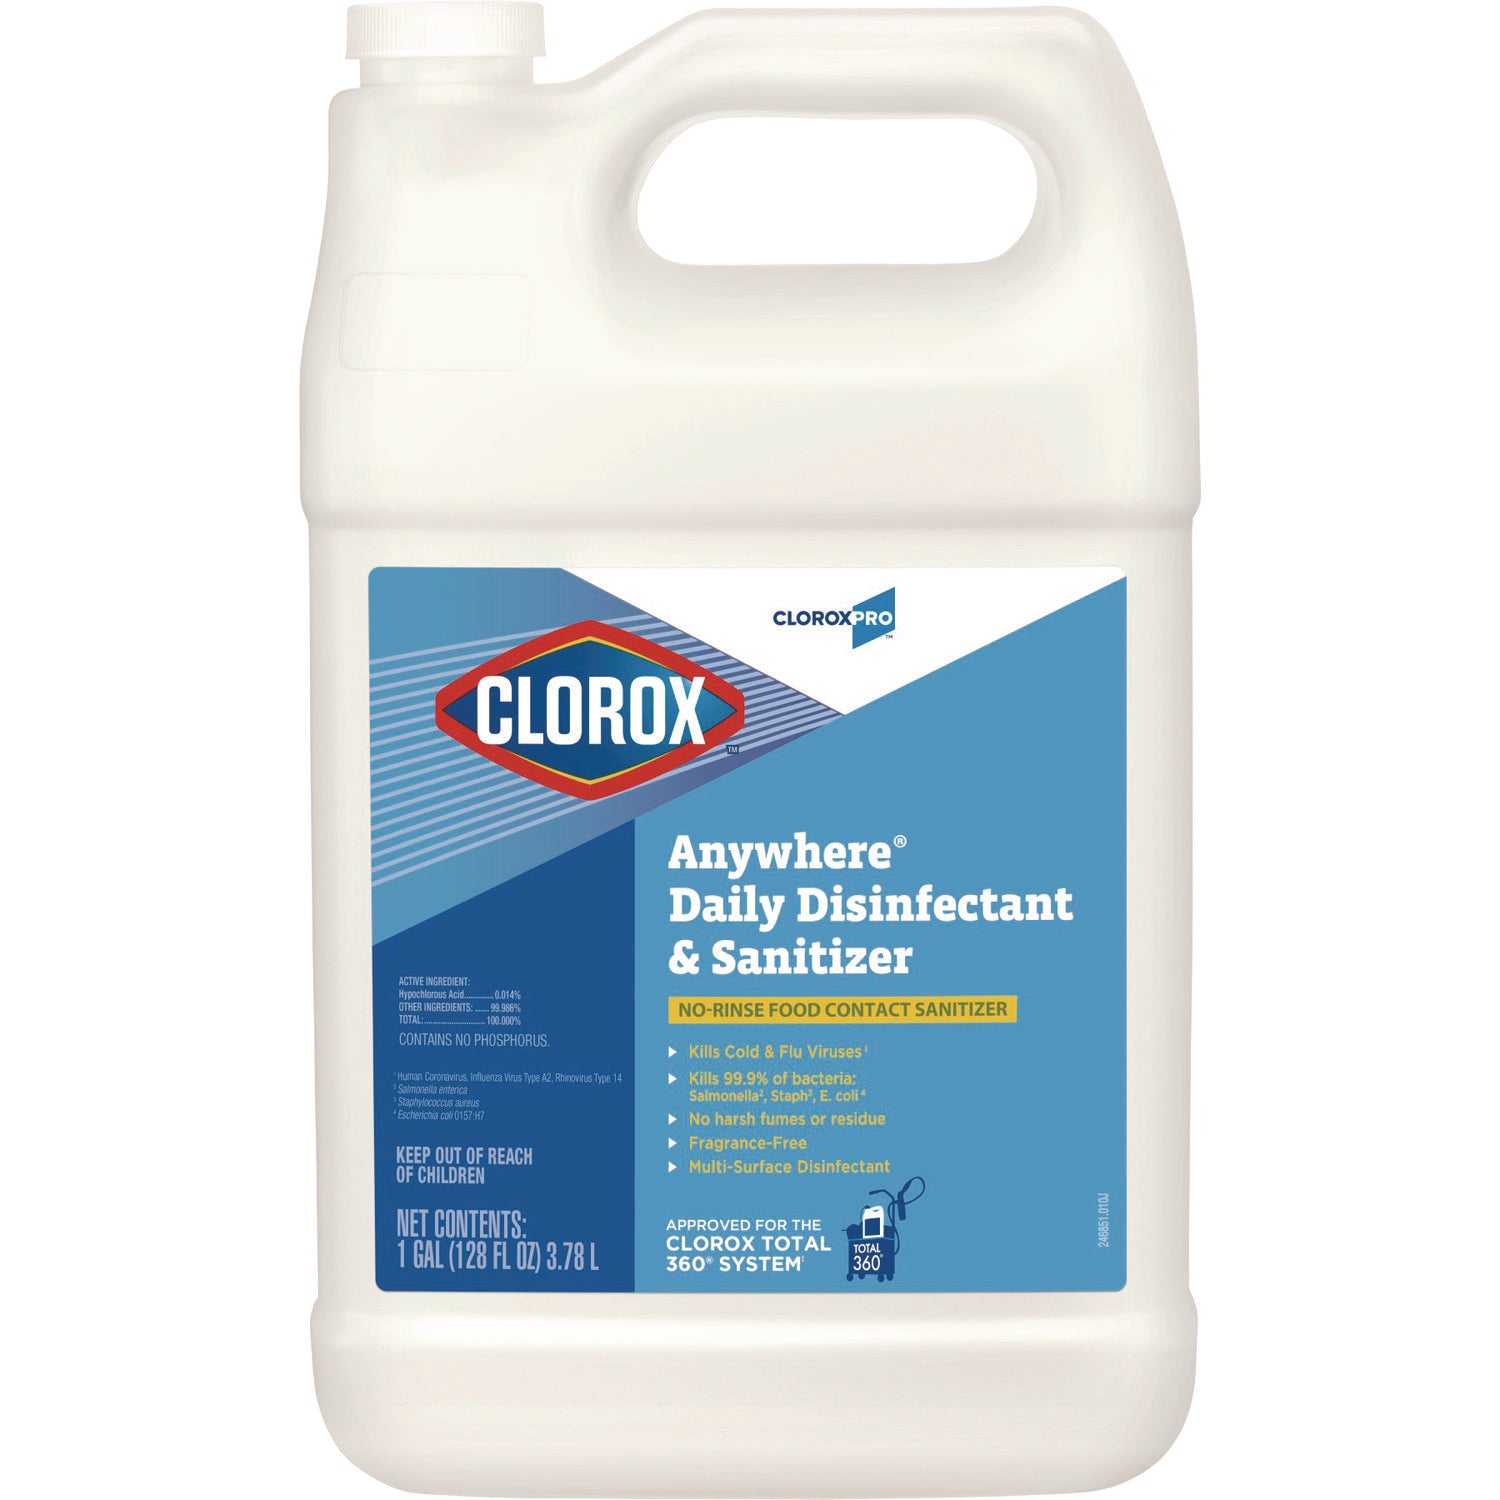 CloroxPro Anywhere Daily Disinfectant and Sanitizing Bottle - 128 fl oz (4 quart) - 1 Each - Disinfectant, Deodorize, pH Balanced - Translucent - 1